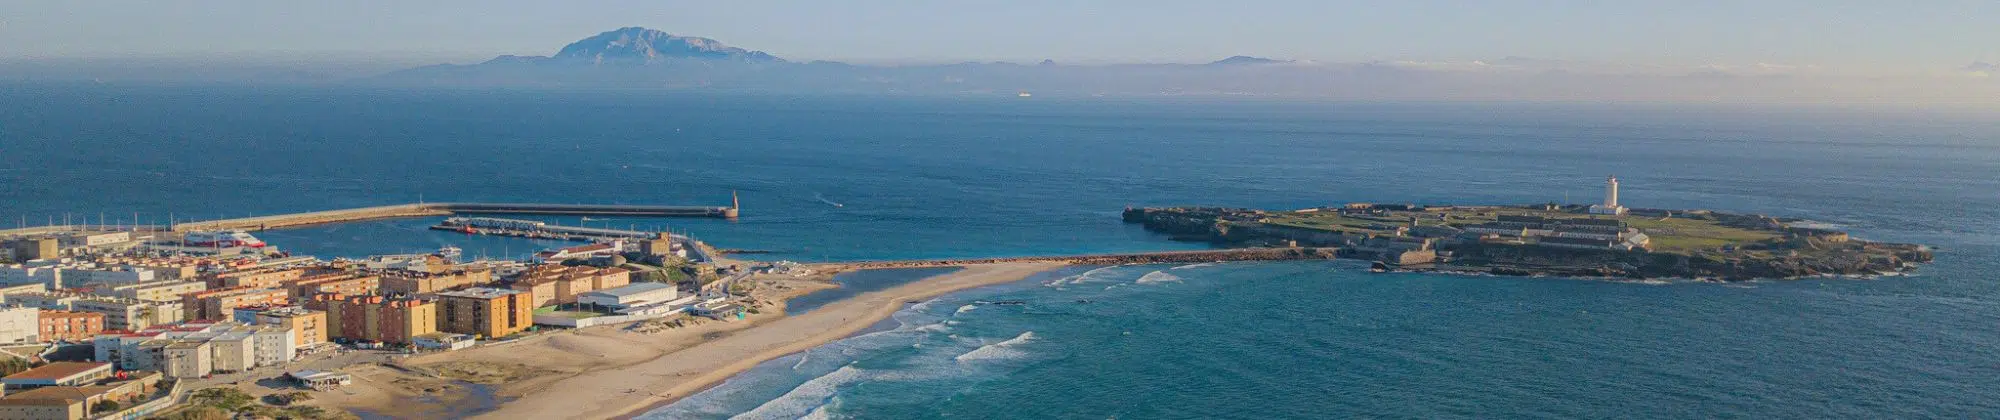 Beach and Old tow of Tarifa view from the sky